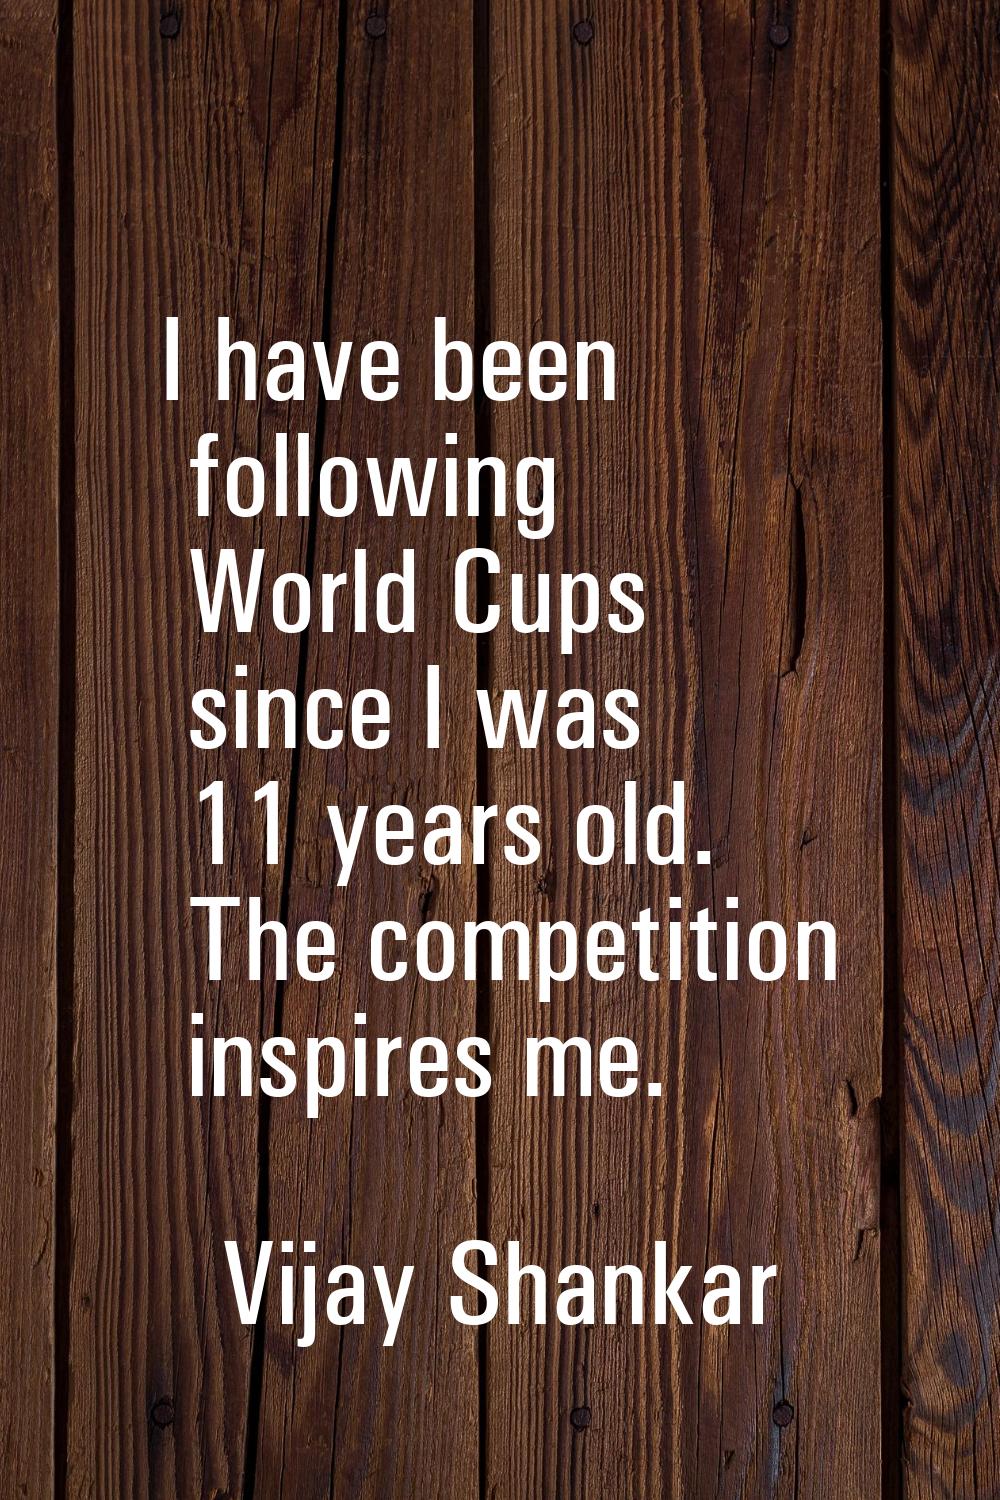 I have been following World Cups since I was 11 years old. The competition inspires me.